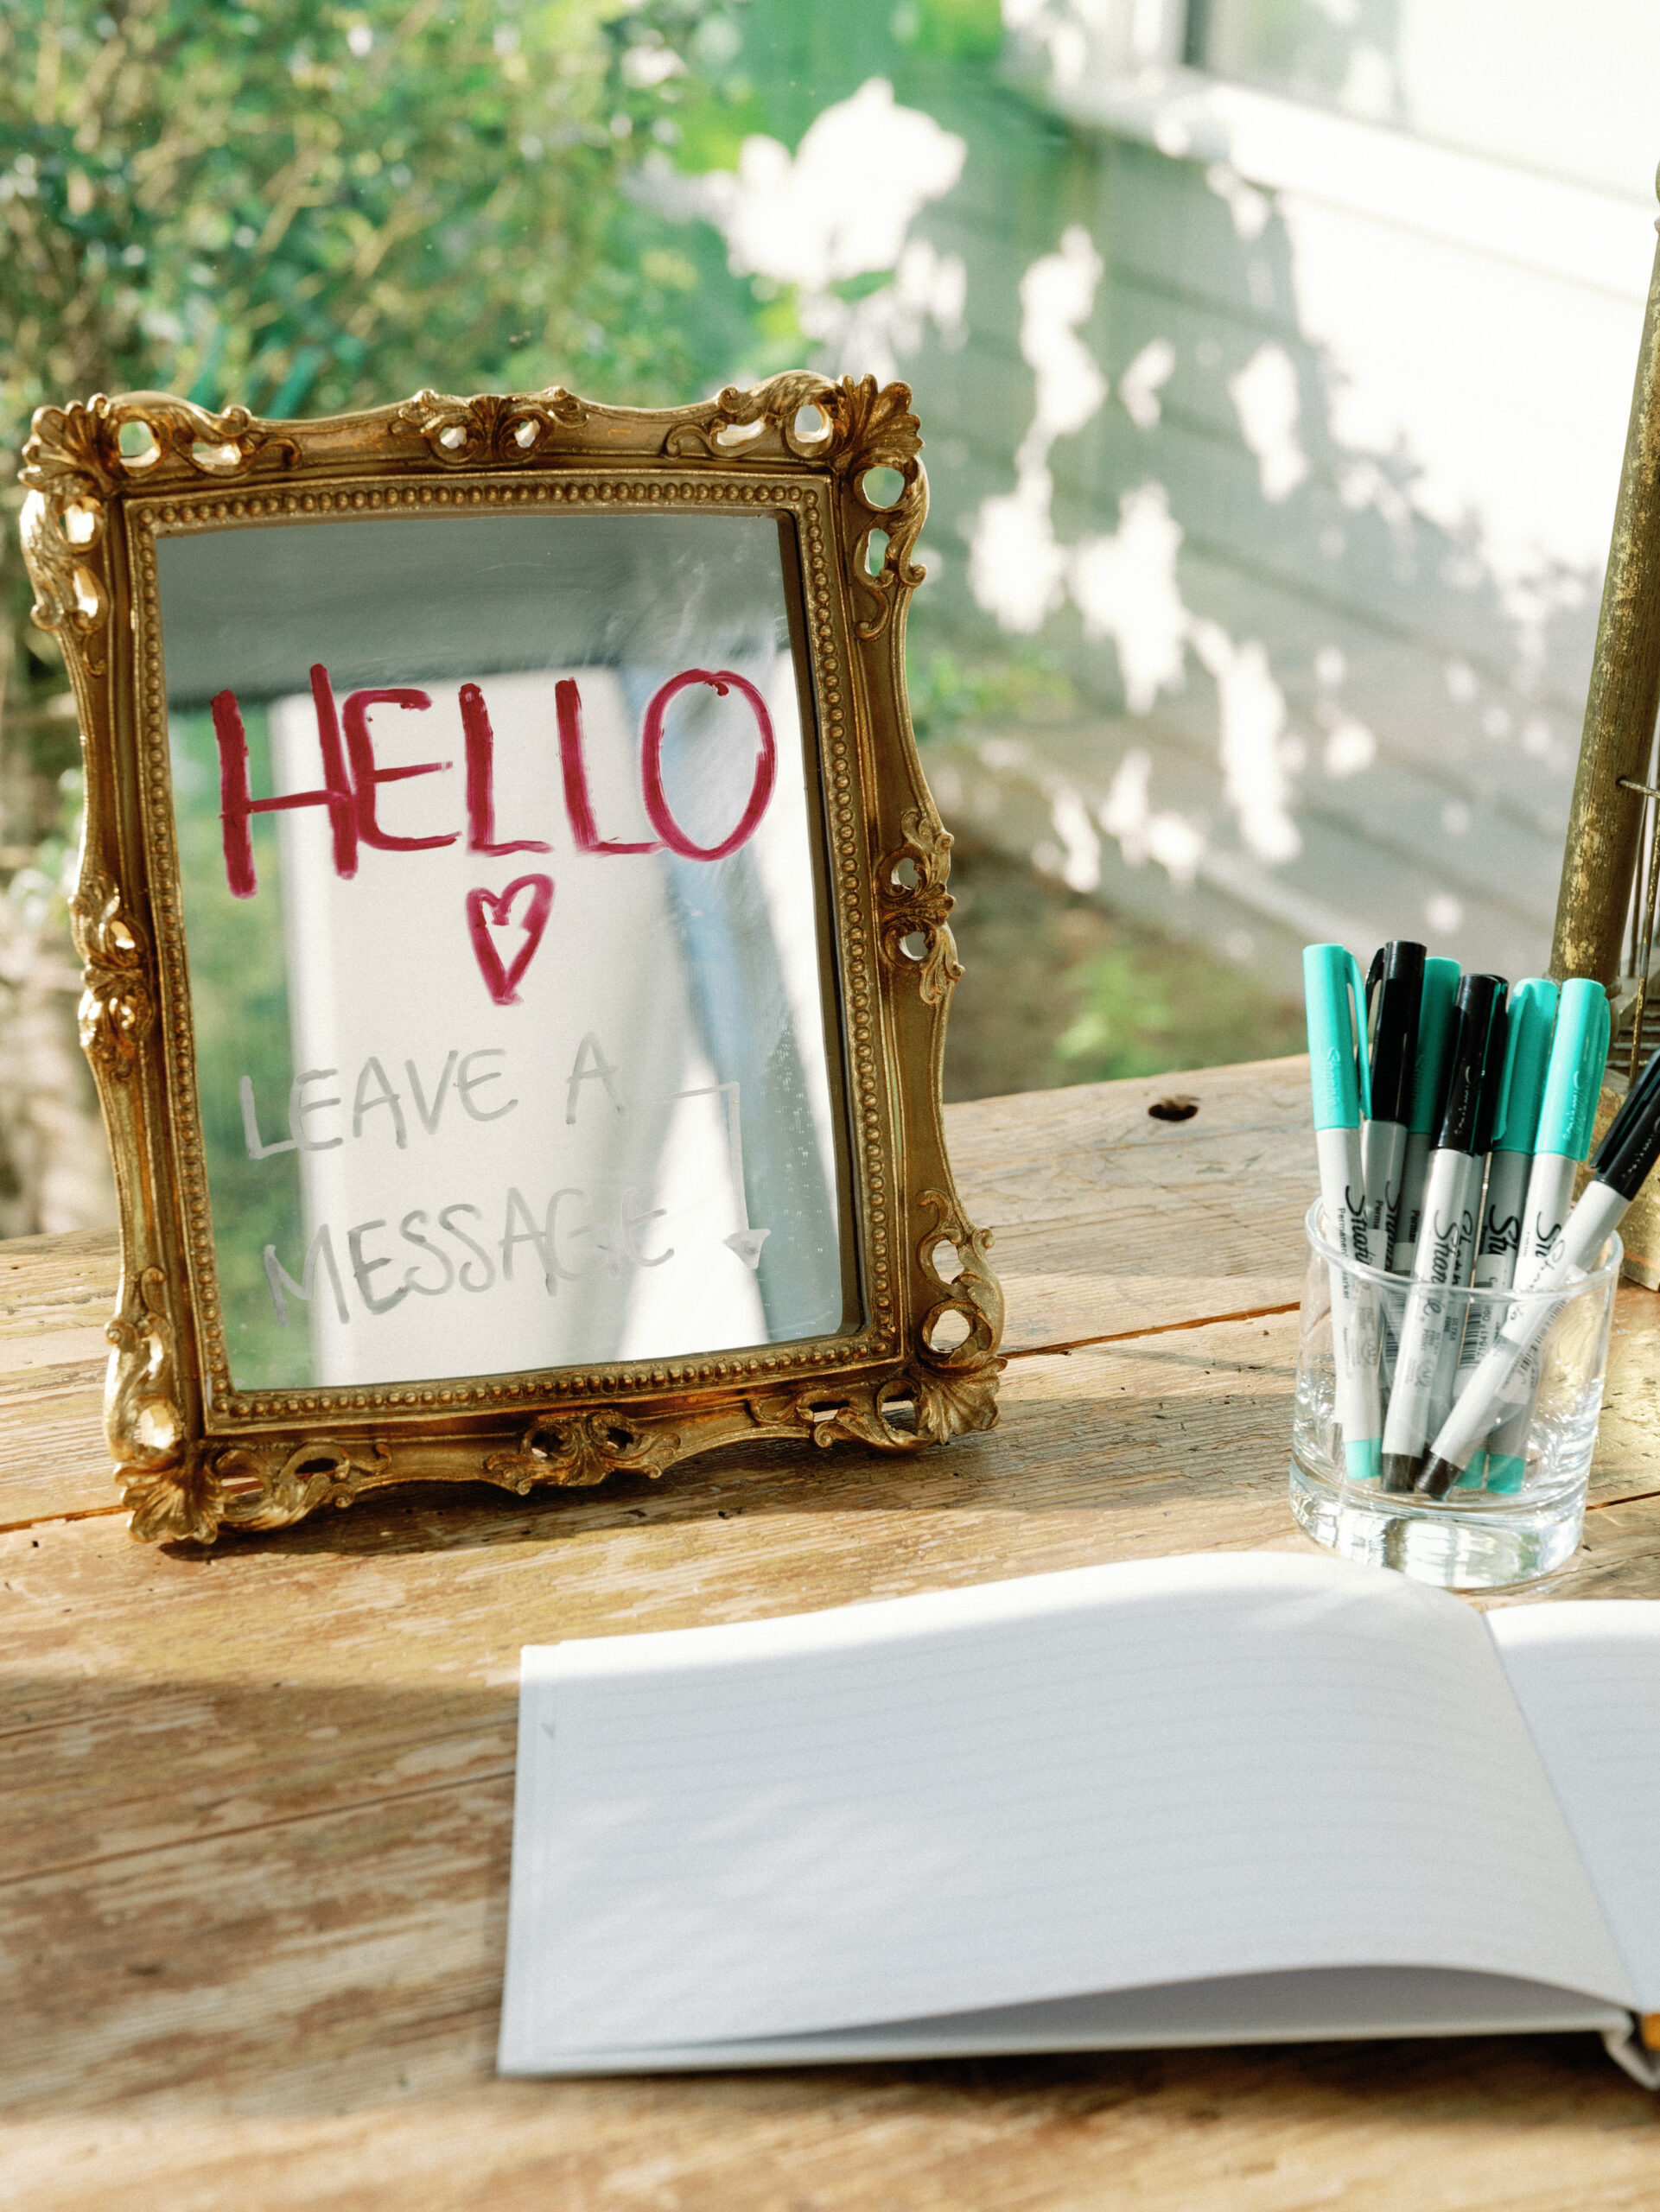 Wedding book and a jar of pens placed on a wooden table. Fine art wedding photography image by Jenny Fu Studio